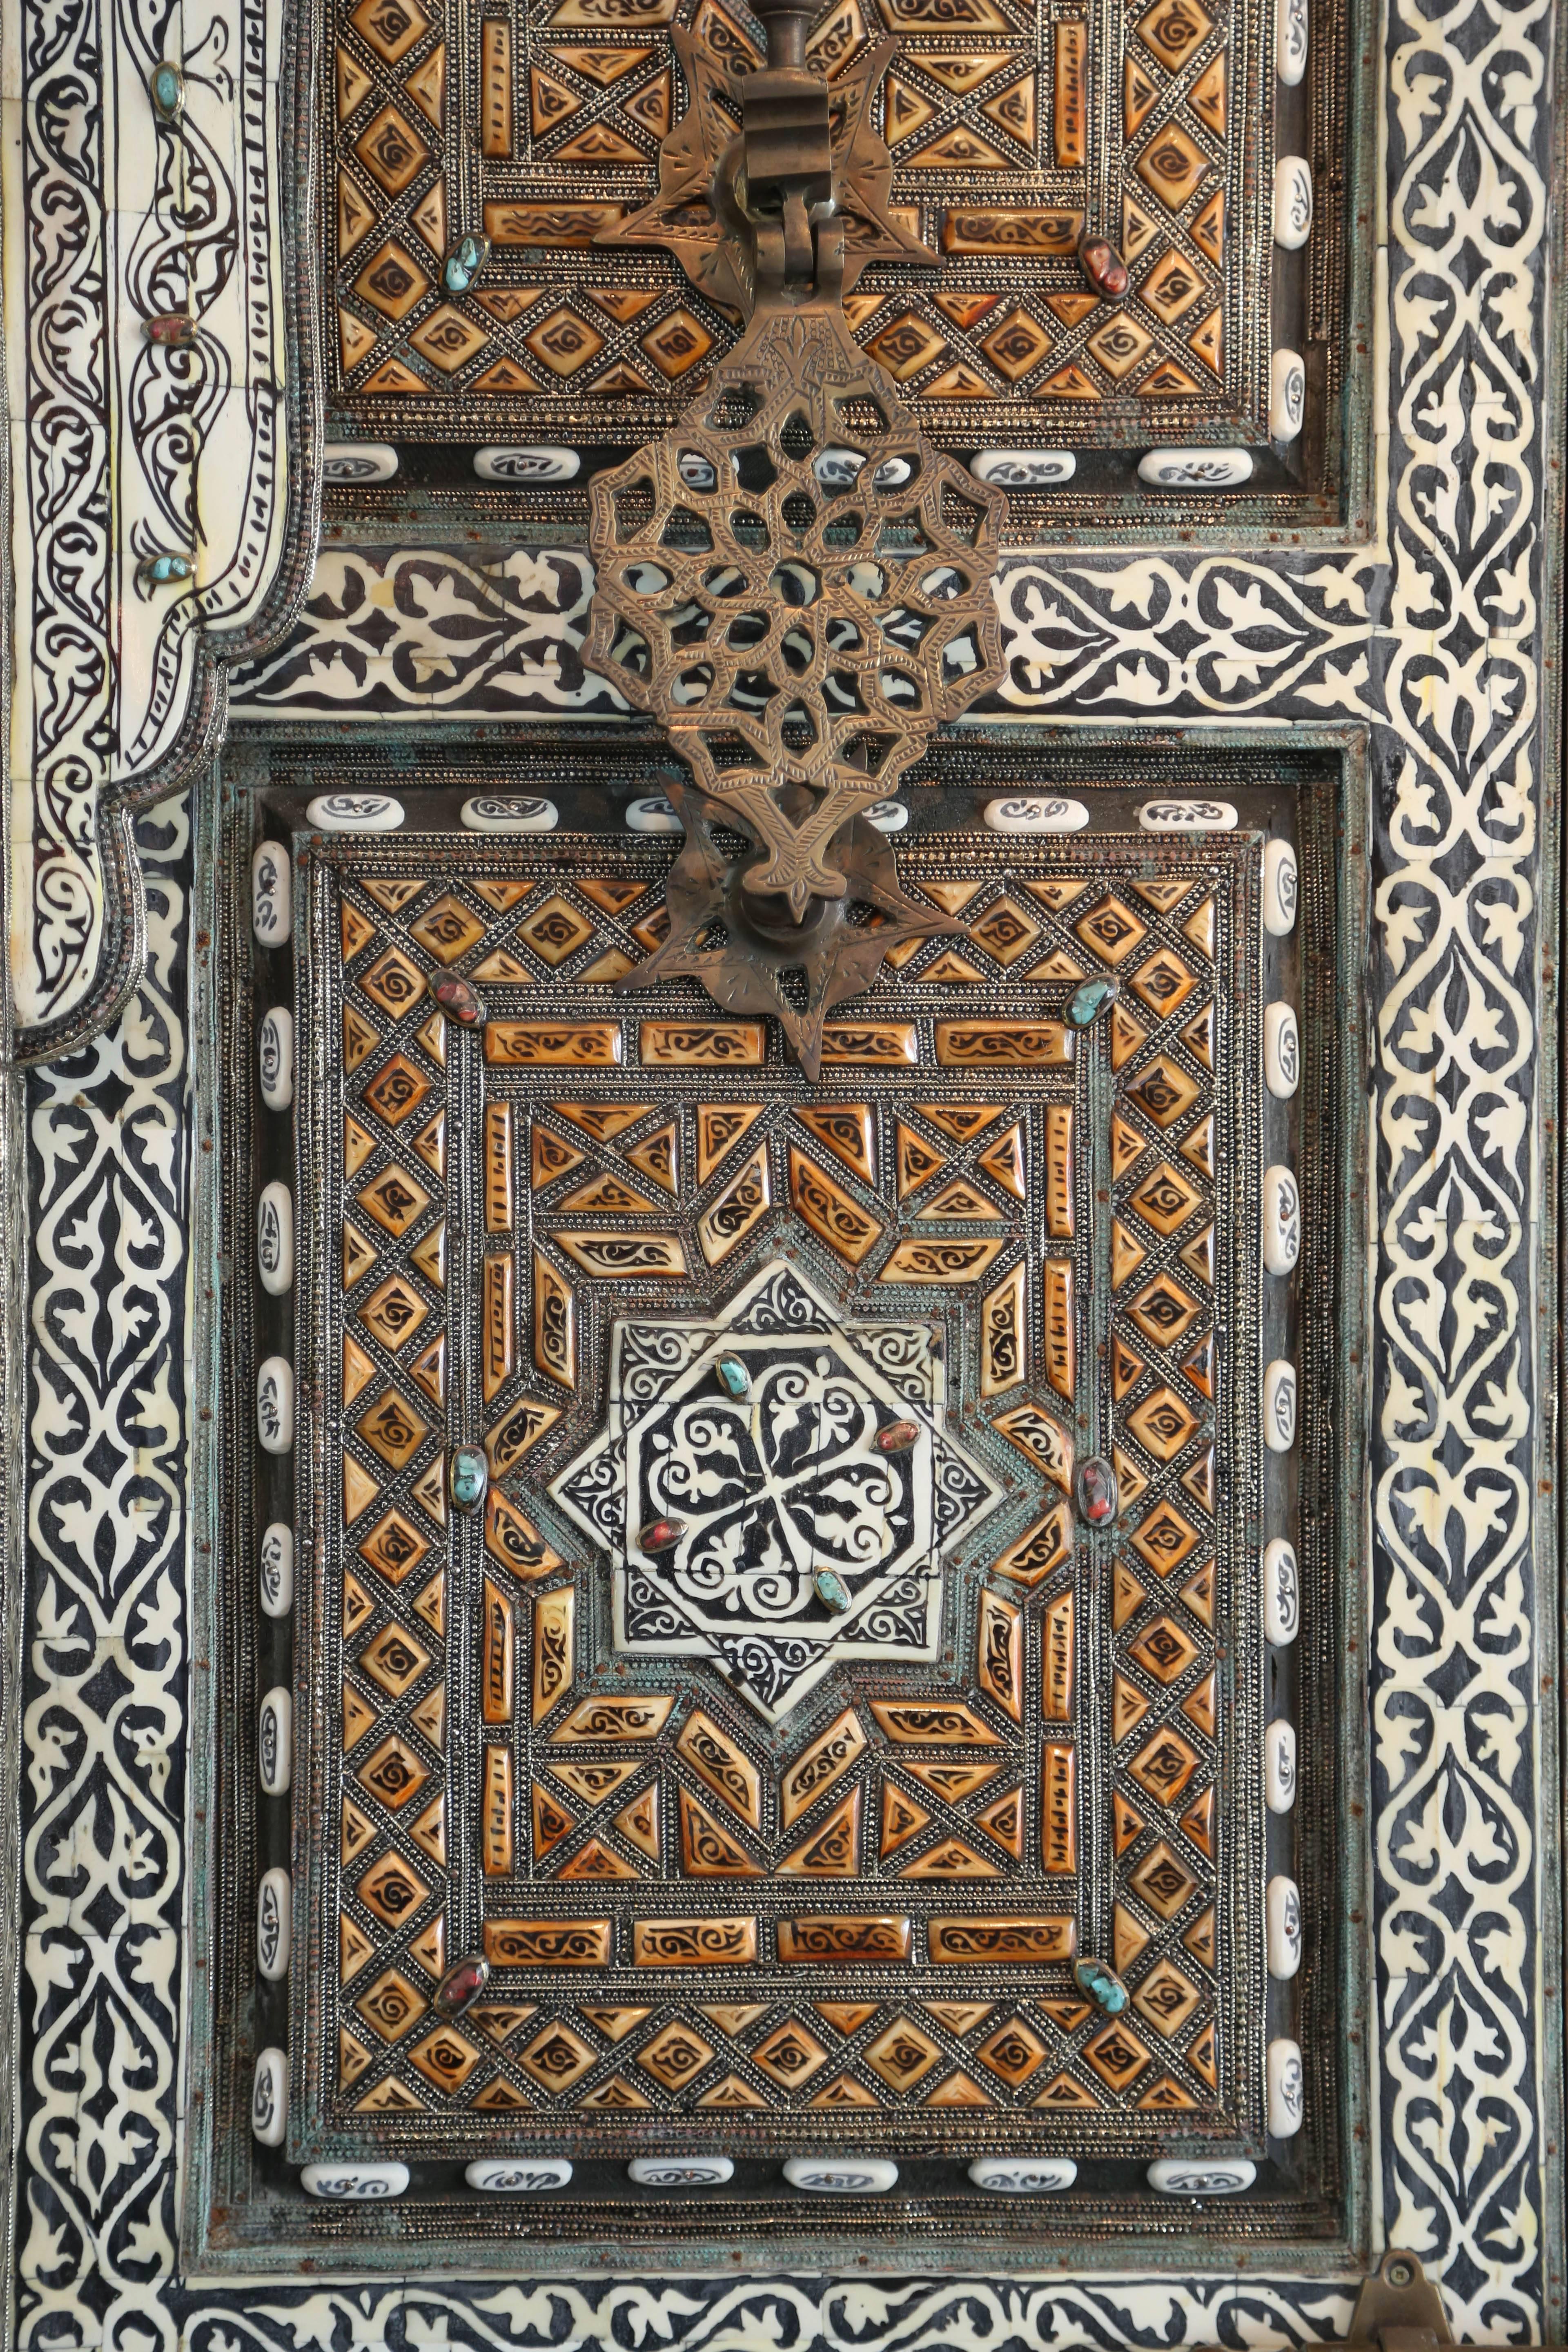 Exquisite Moroccan Palace door. Hand-carved camel bone and mousharabi work done by master craftsman. Brass crafted hardware. Adorned with semi precious stones, red coral and blue turquoise.
Door requires hinges to work.
Cutout size 99"1/4 H X